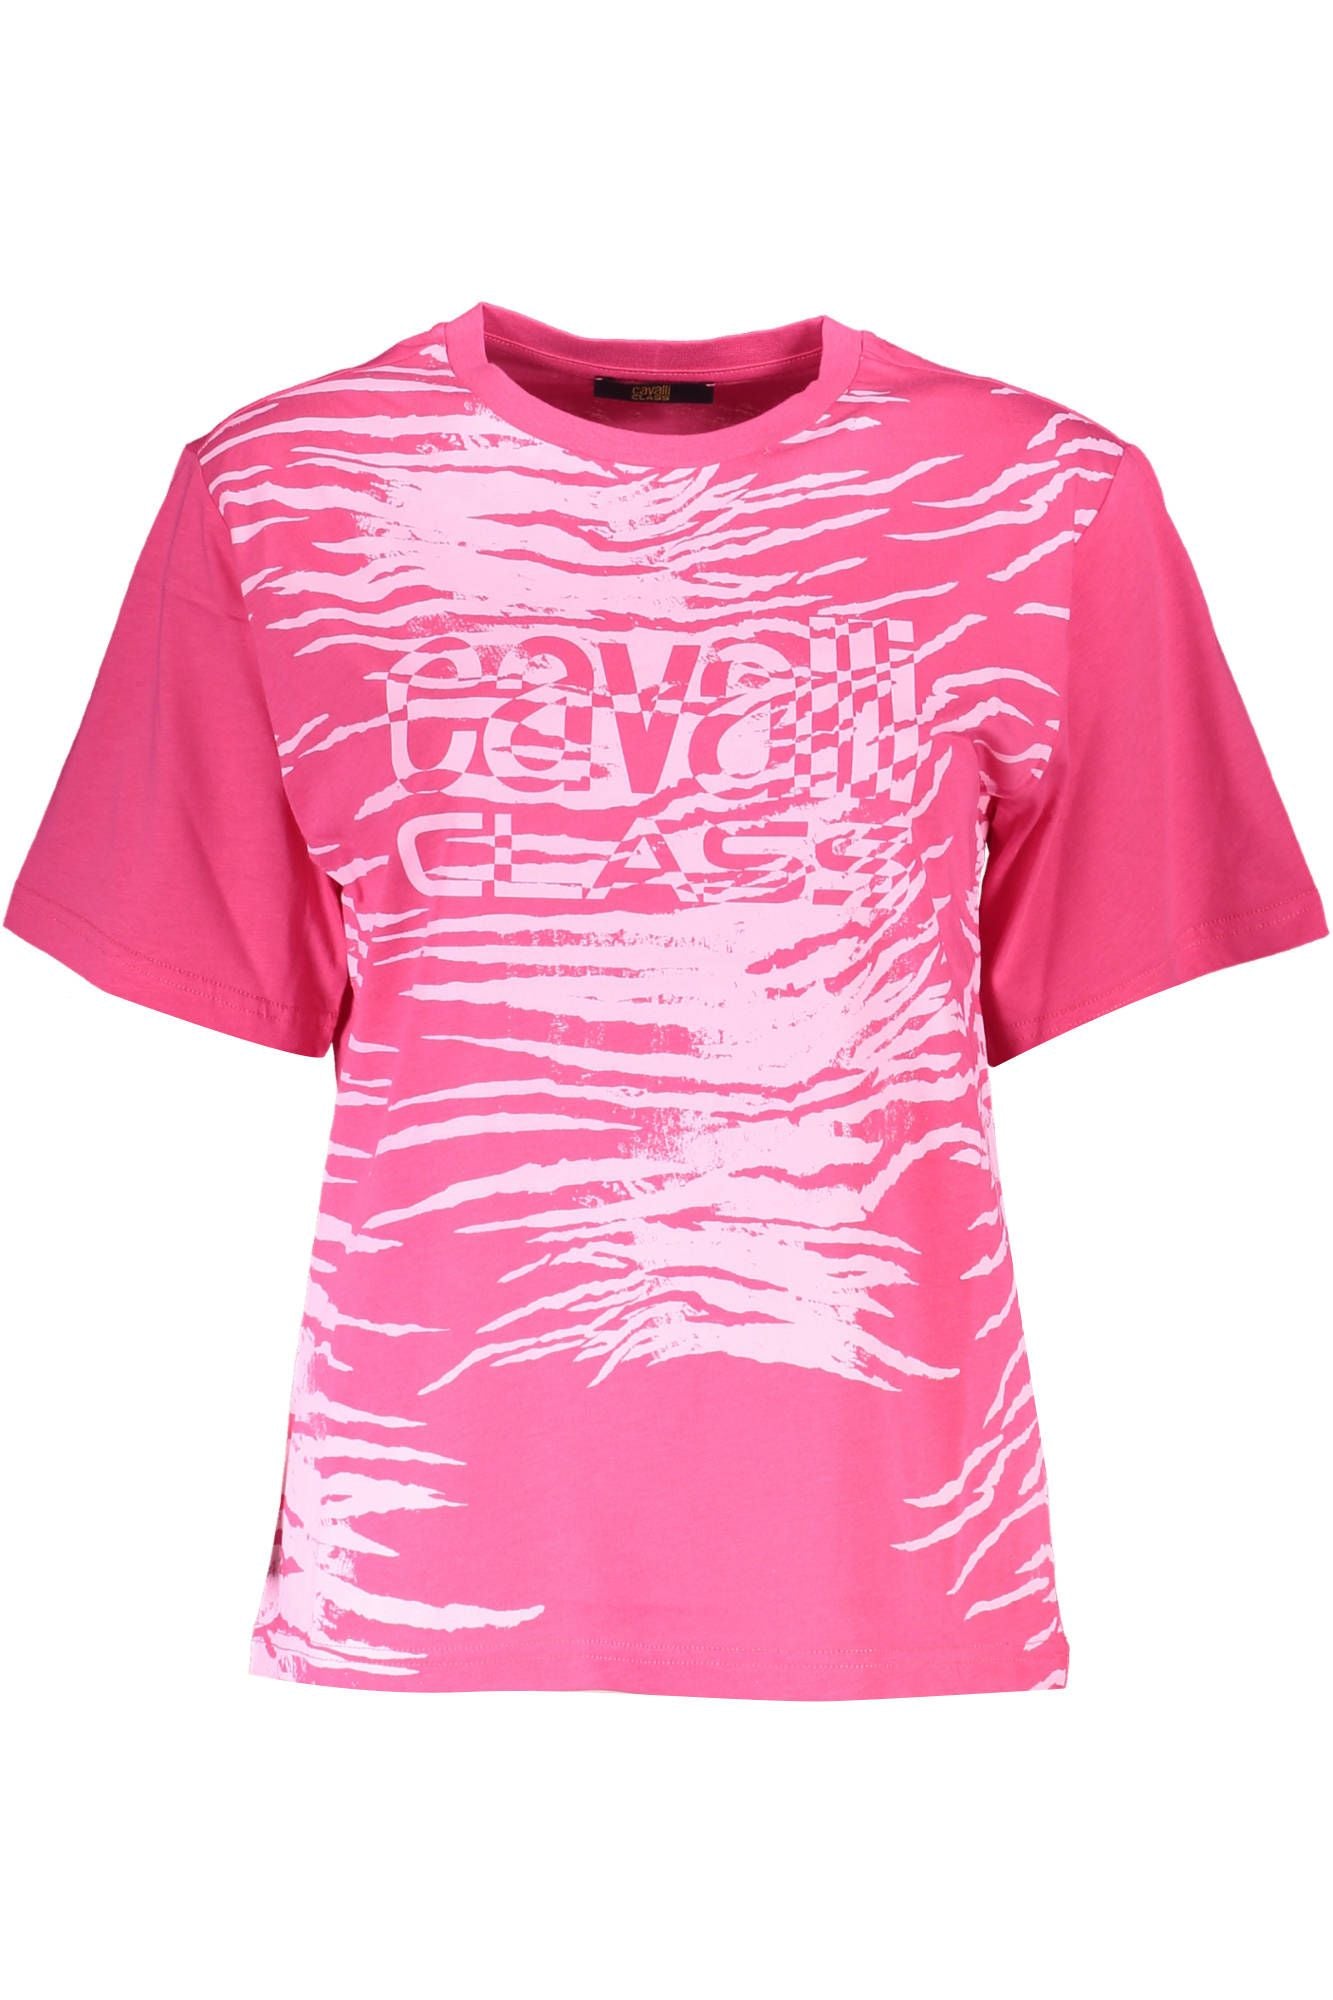 Chic Pink Cotton Tee with Logo Print